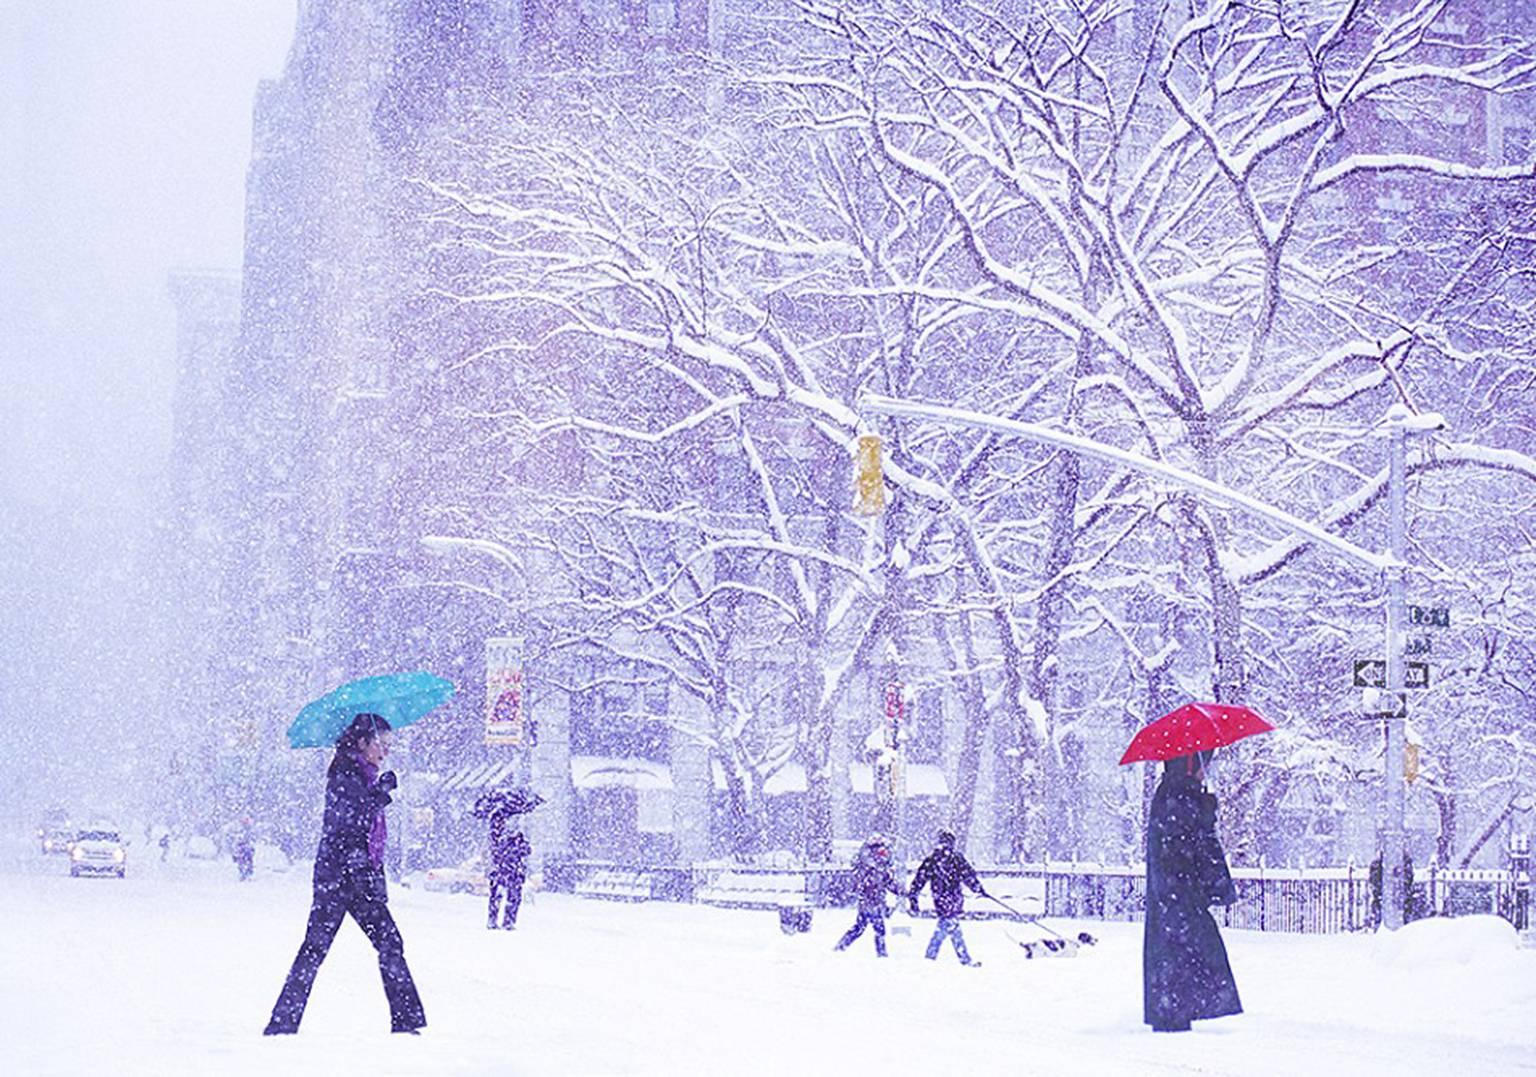 Mitchell Funk Color Photograph - Two Umbrellas in New York Snowstorm